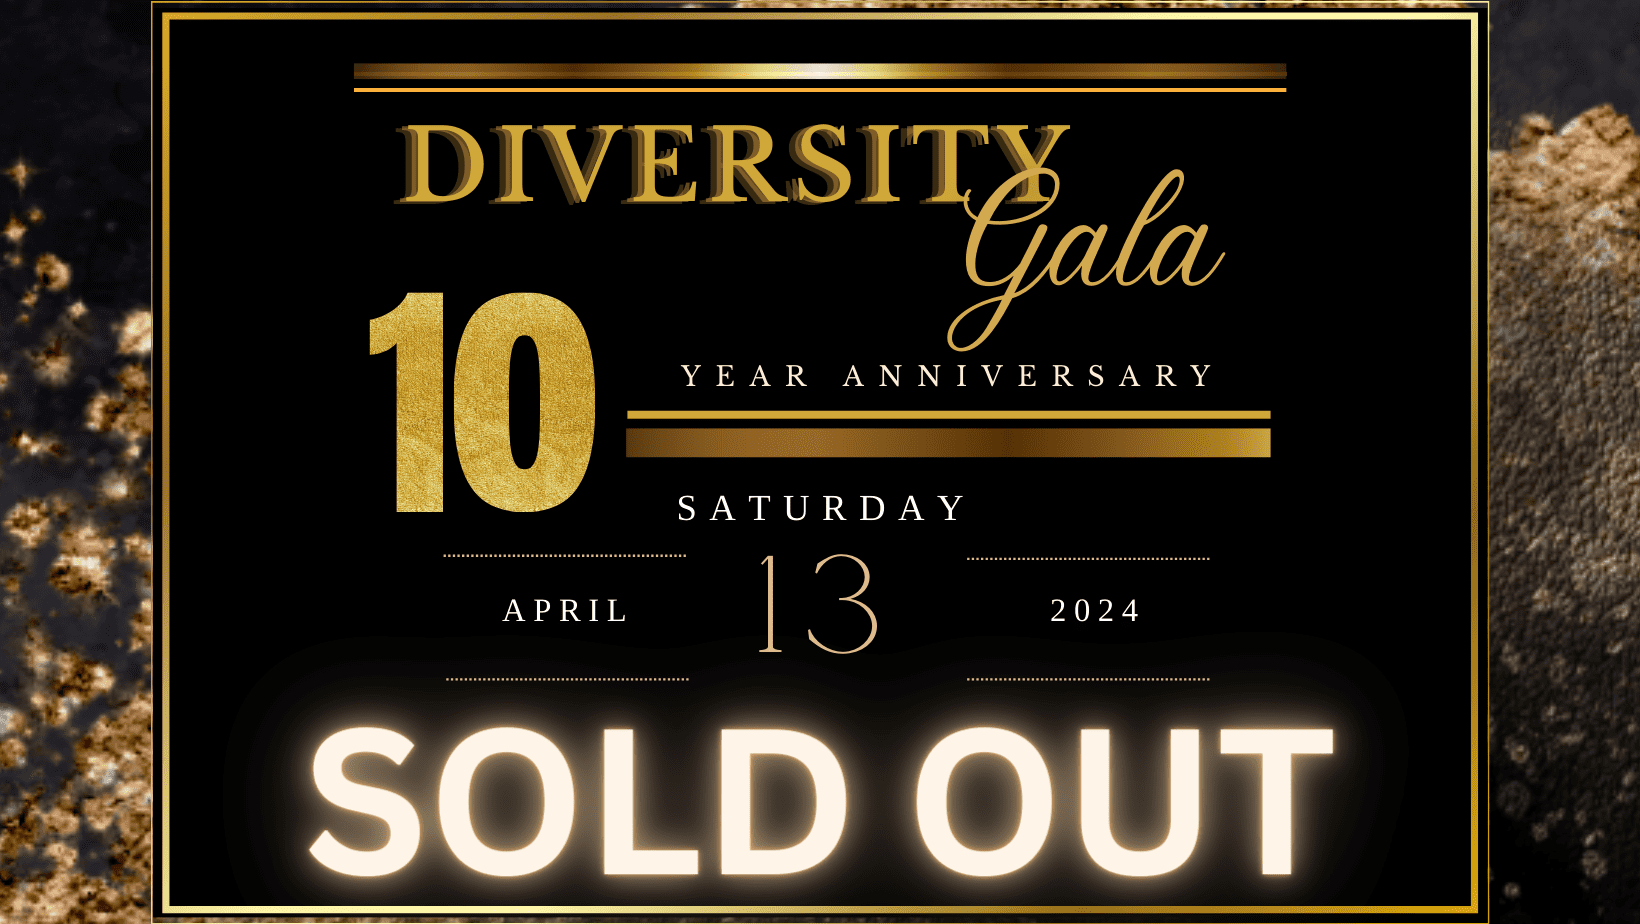 Elegant sold-out announcement for the 10th year anniversary of the diversity gala event, scheduled for saturday, april 13, 2024.